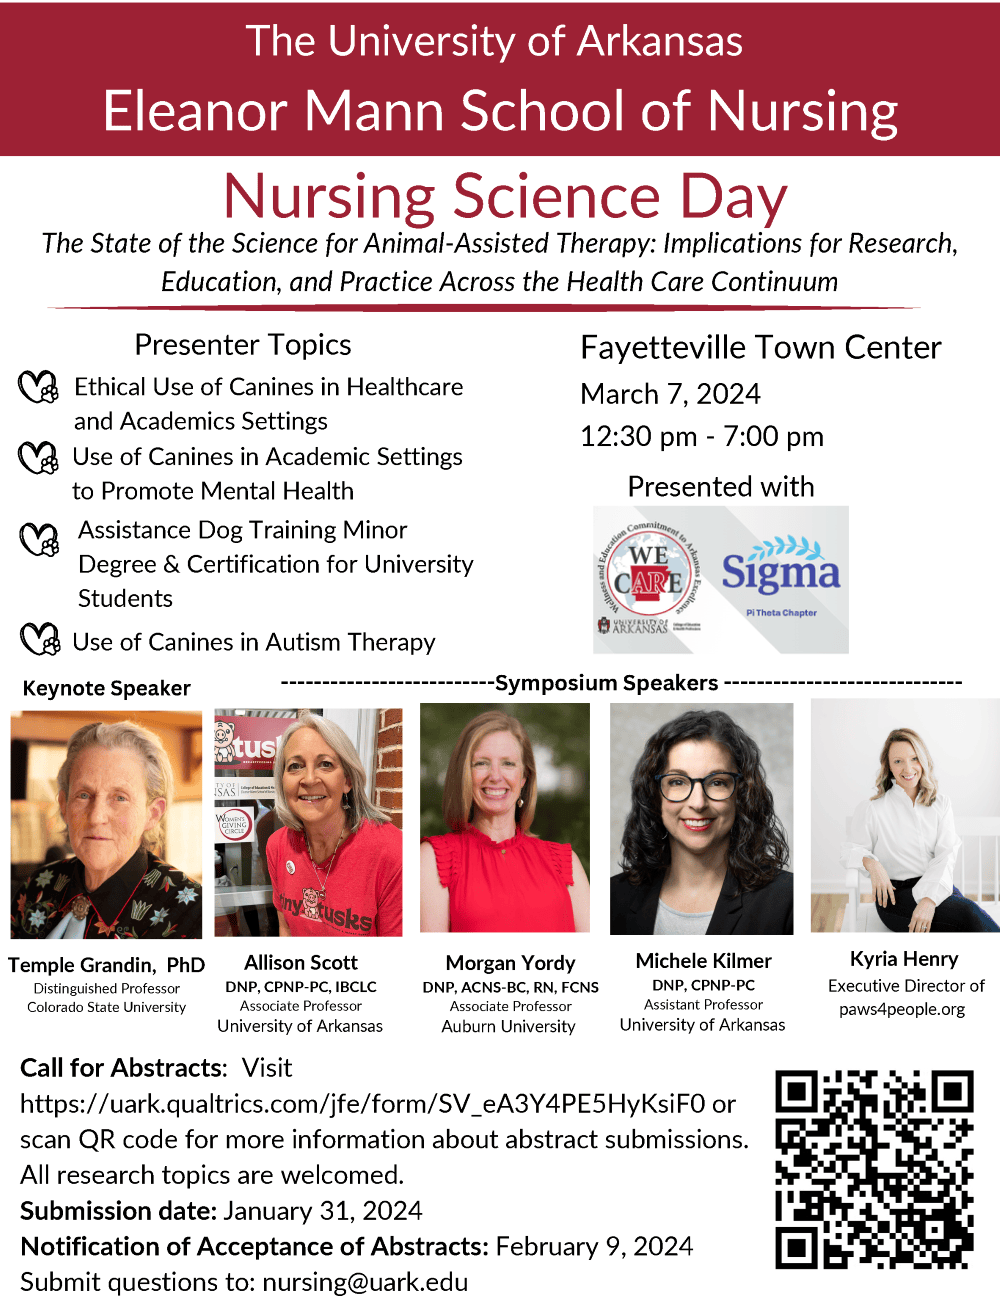 Click to download PDF of flyer for the 2024 Nursing Science Day